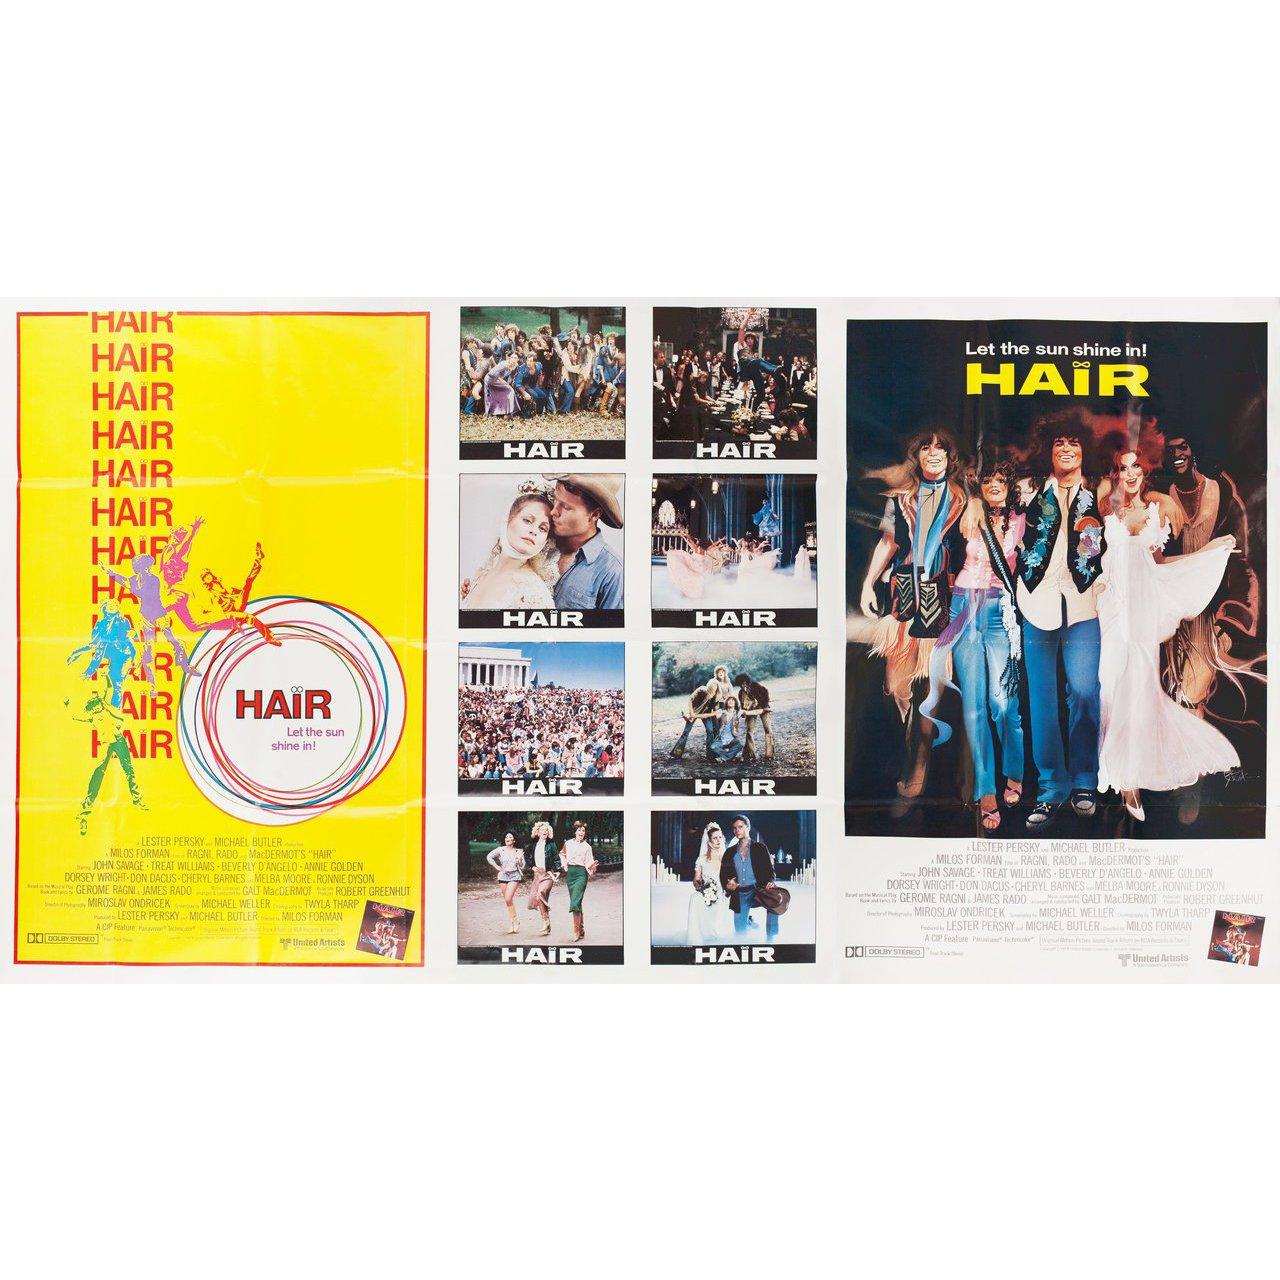 Original 1979 U.S. one stop poster for the film “Hair” directed by Milos Forman with John Savage / Treat Williams / Beverly D'Angelo / Annie Golden. Very good-fine condition, folded. Many original posters were issued folded or were subsequently